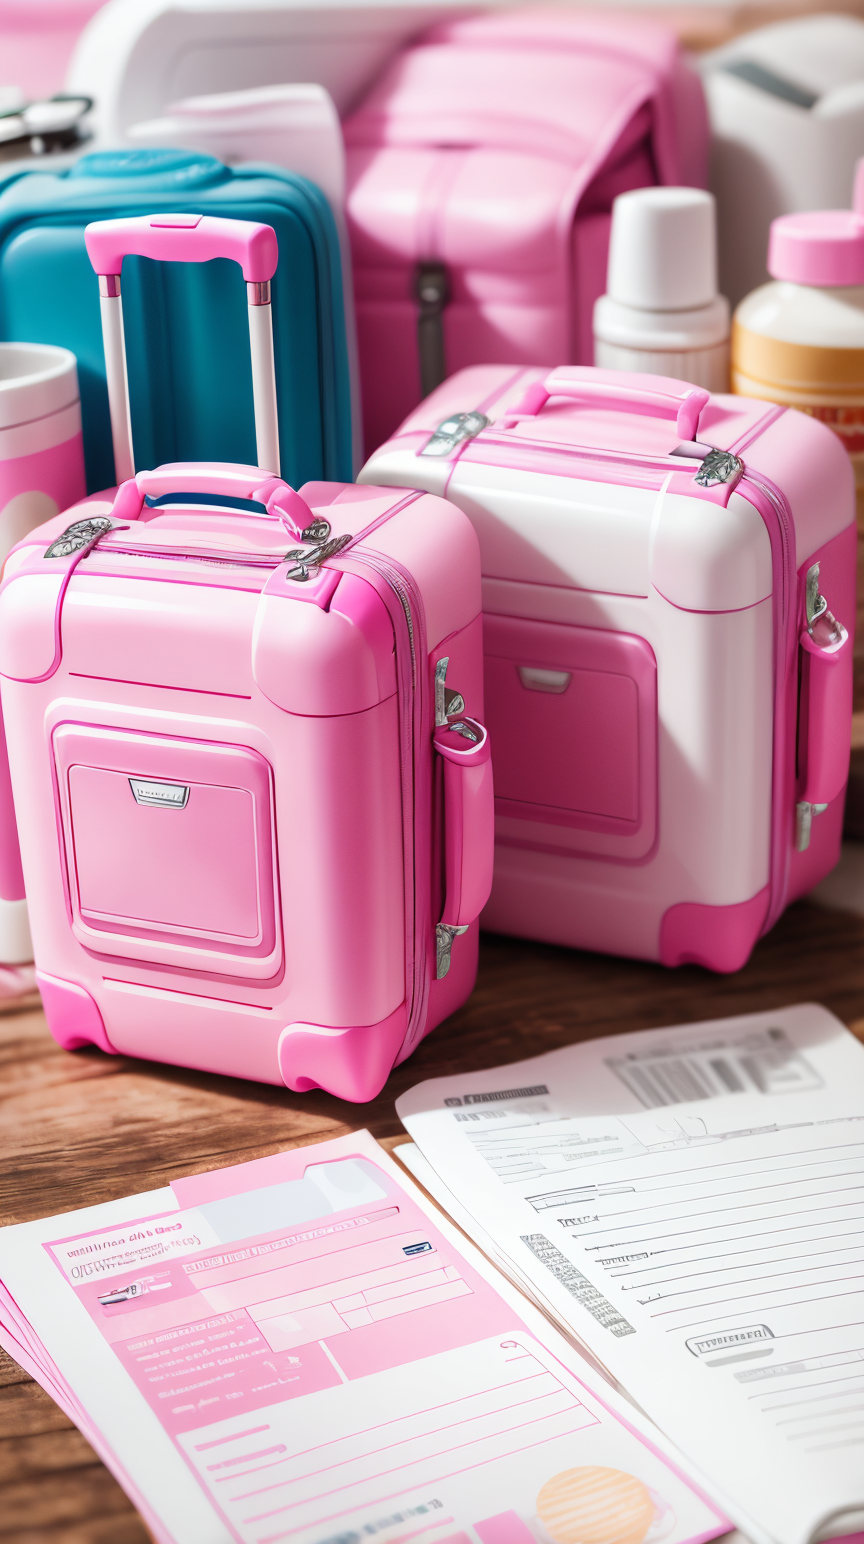 <lora:BarbieCore:0.8> BarbieCore Travel documents, (shiny plastic:0.8), (pink and white:0.9), (pastel:0.85)